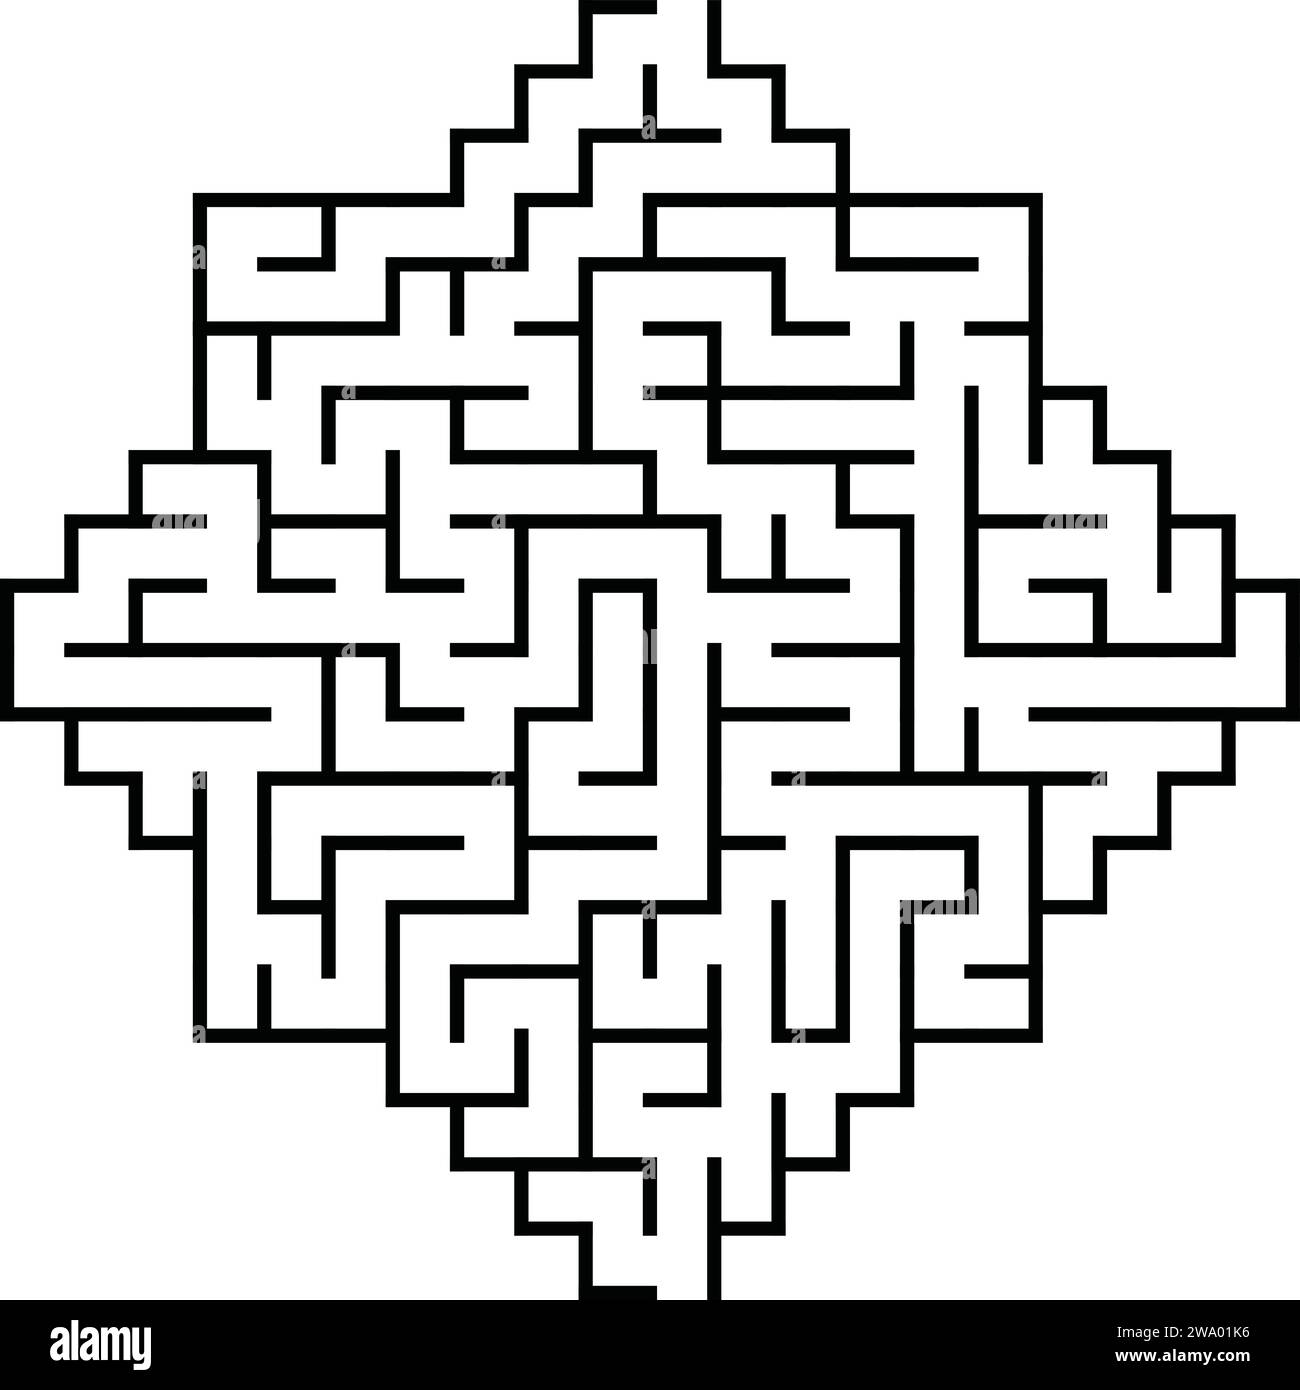 Kids riddle, maze puzzle, labyrinth vector illustration Stock Vector